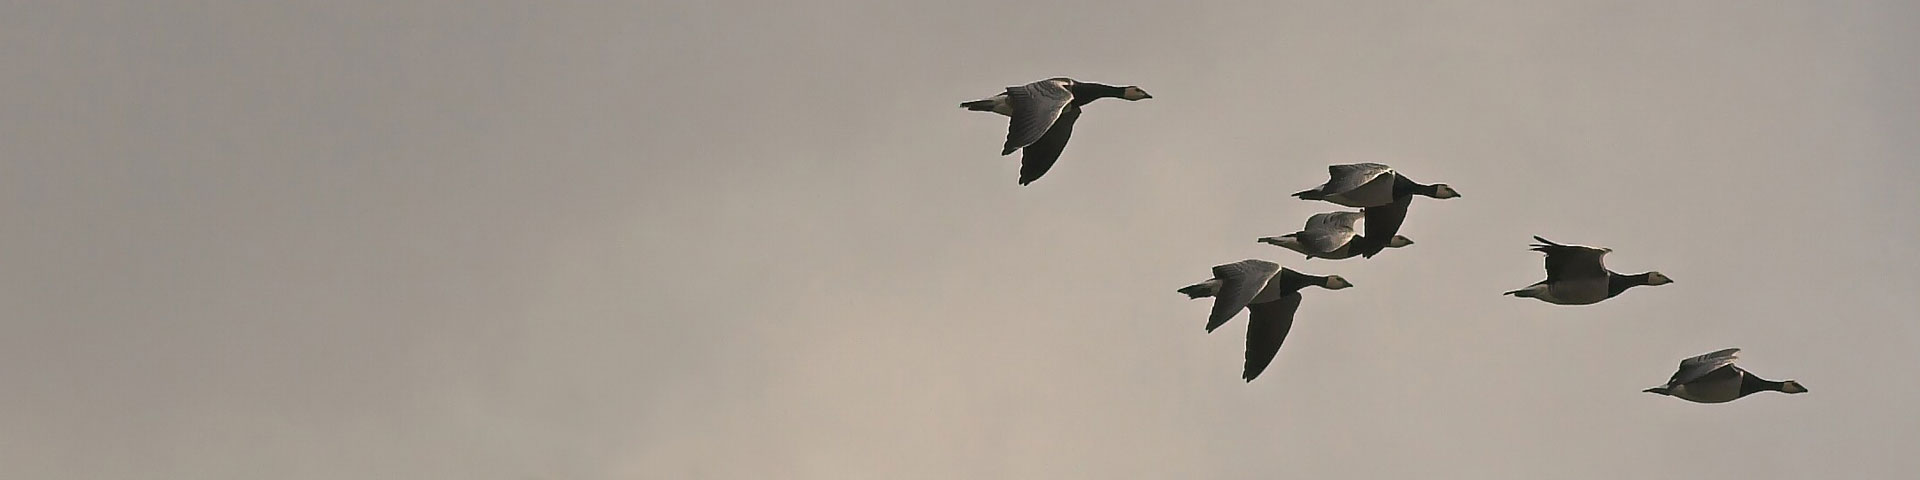 Geese inflight against a grey sky.